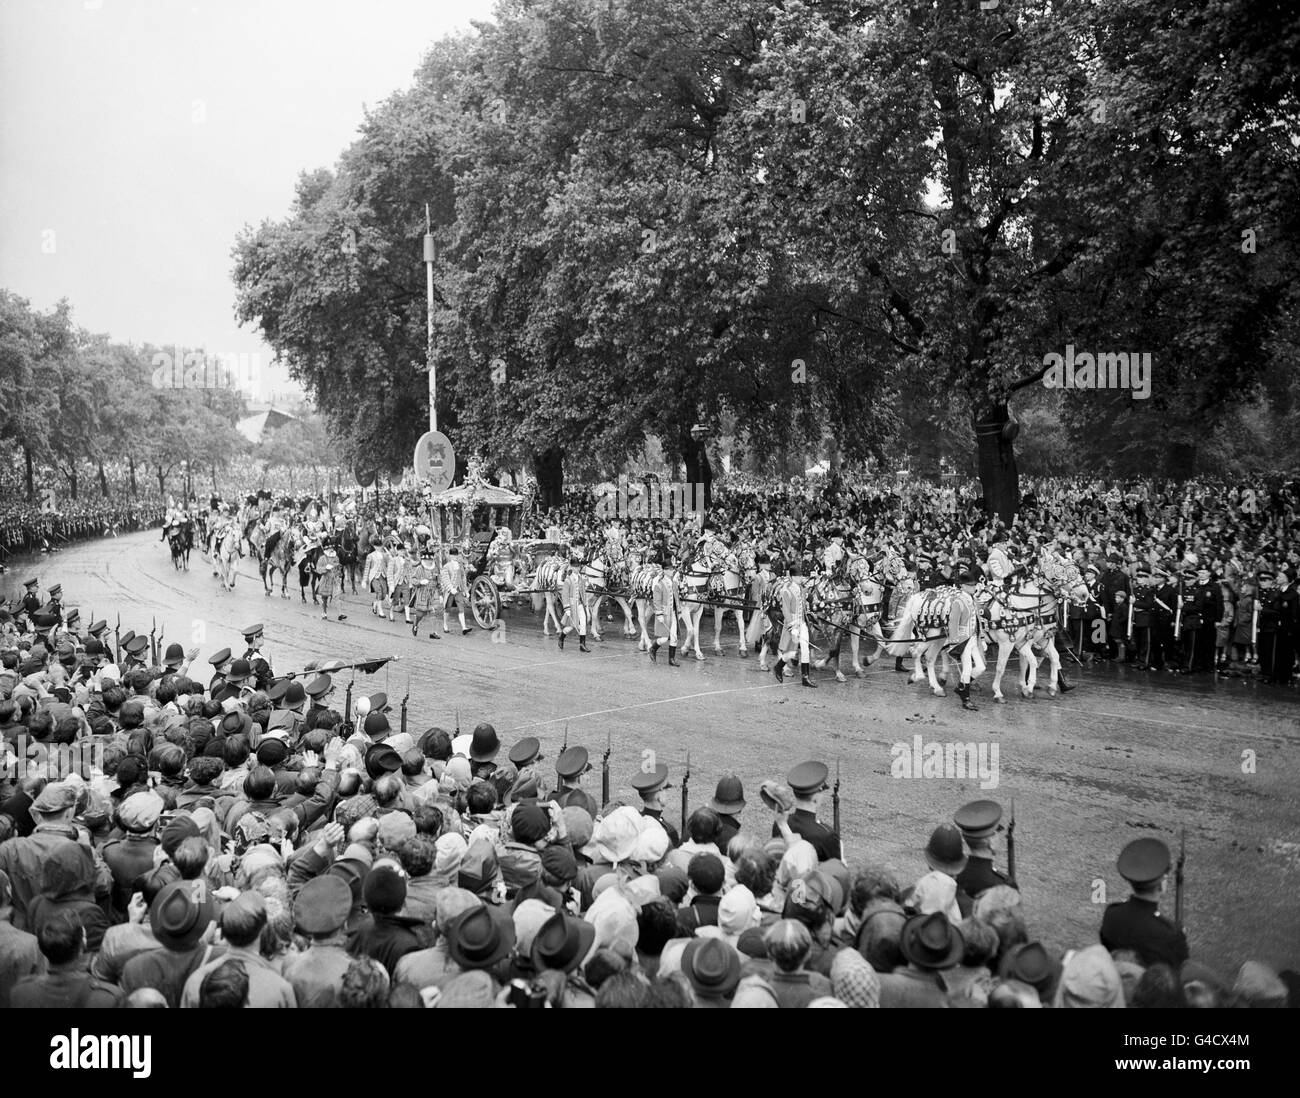 The golden State Coach bearing Queen Elizabeth II and the Duke of Edinburgh passes through the East carriage Drive in Hyde Park on the return from Westminster Abbey to Buckingham Palace after the Coronation. Stock Photo